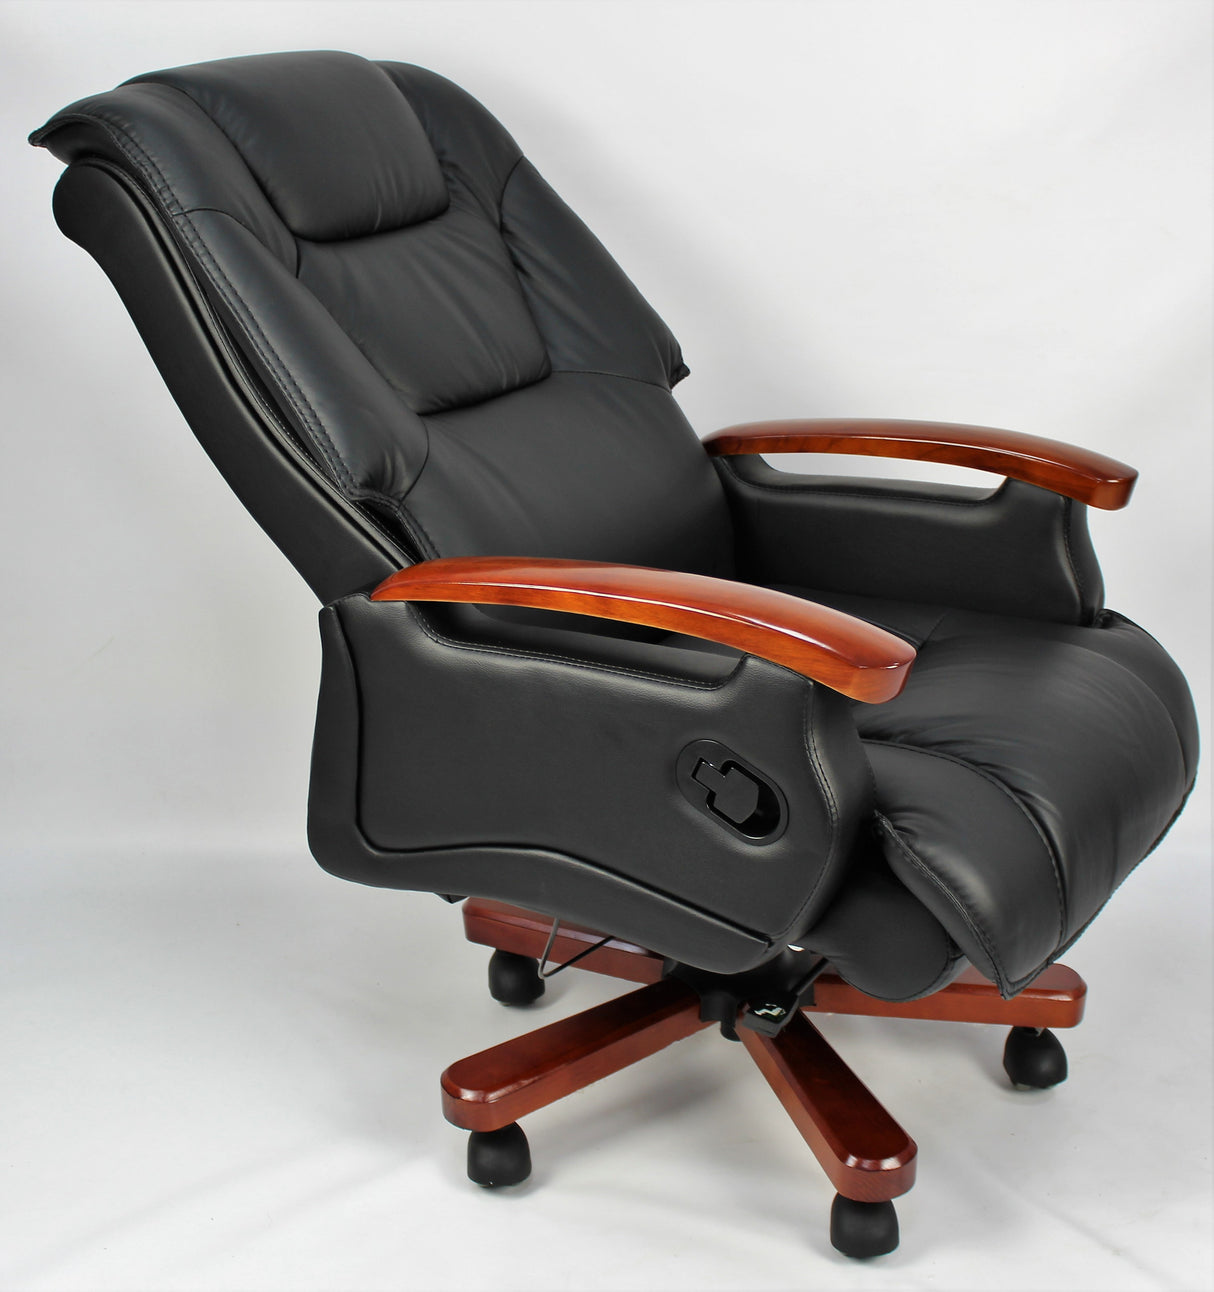 Luxury Black Leather Executive Office Chair - A302